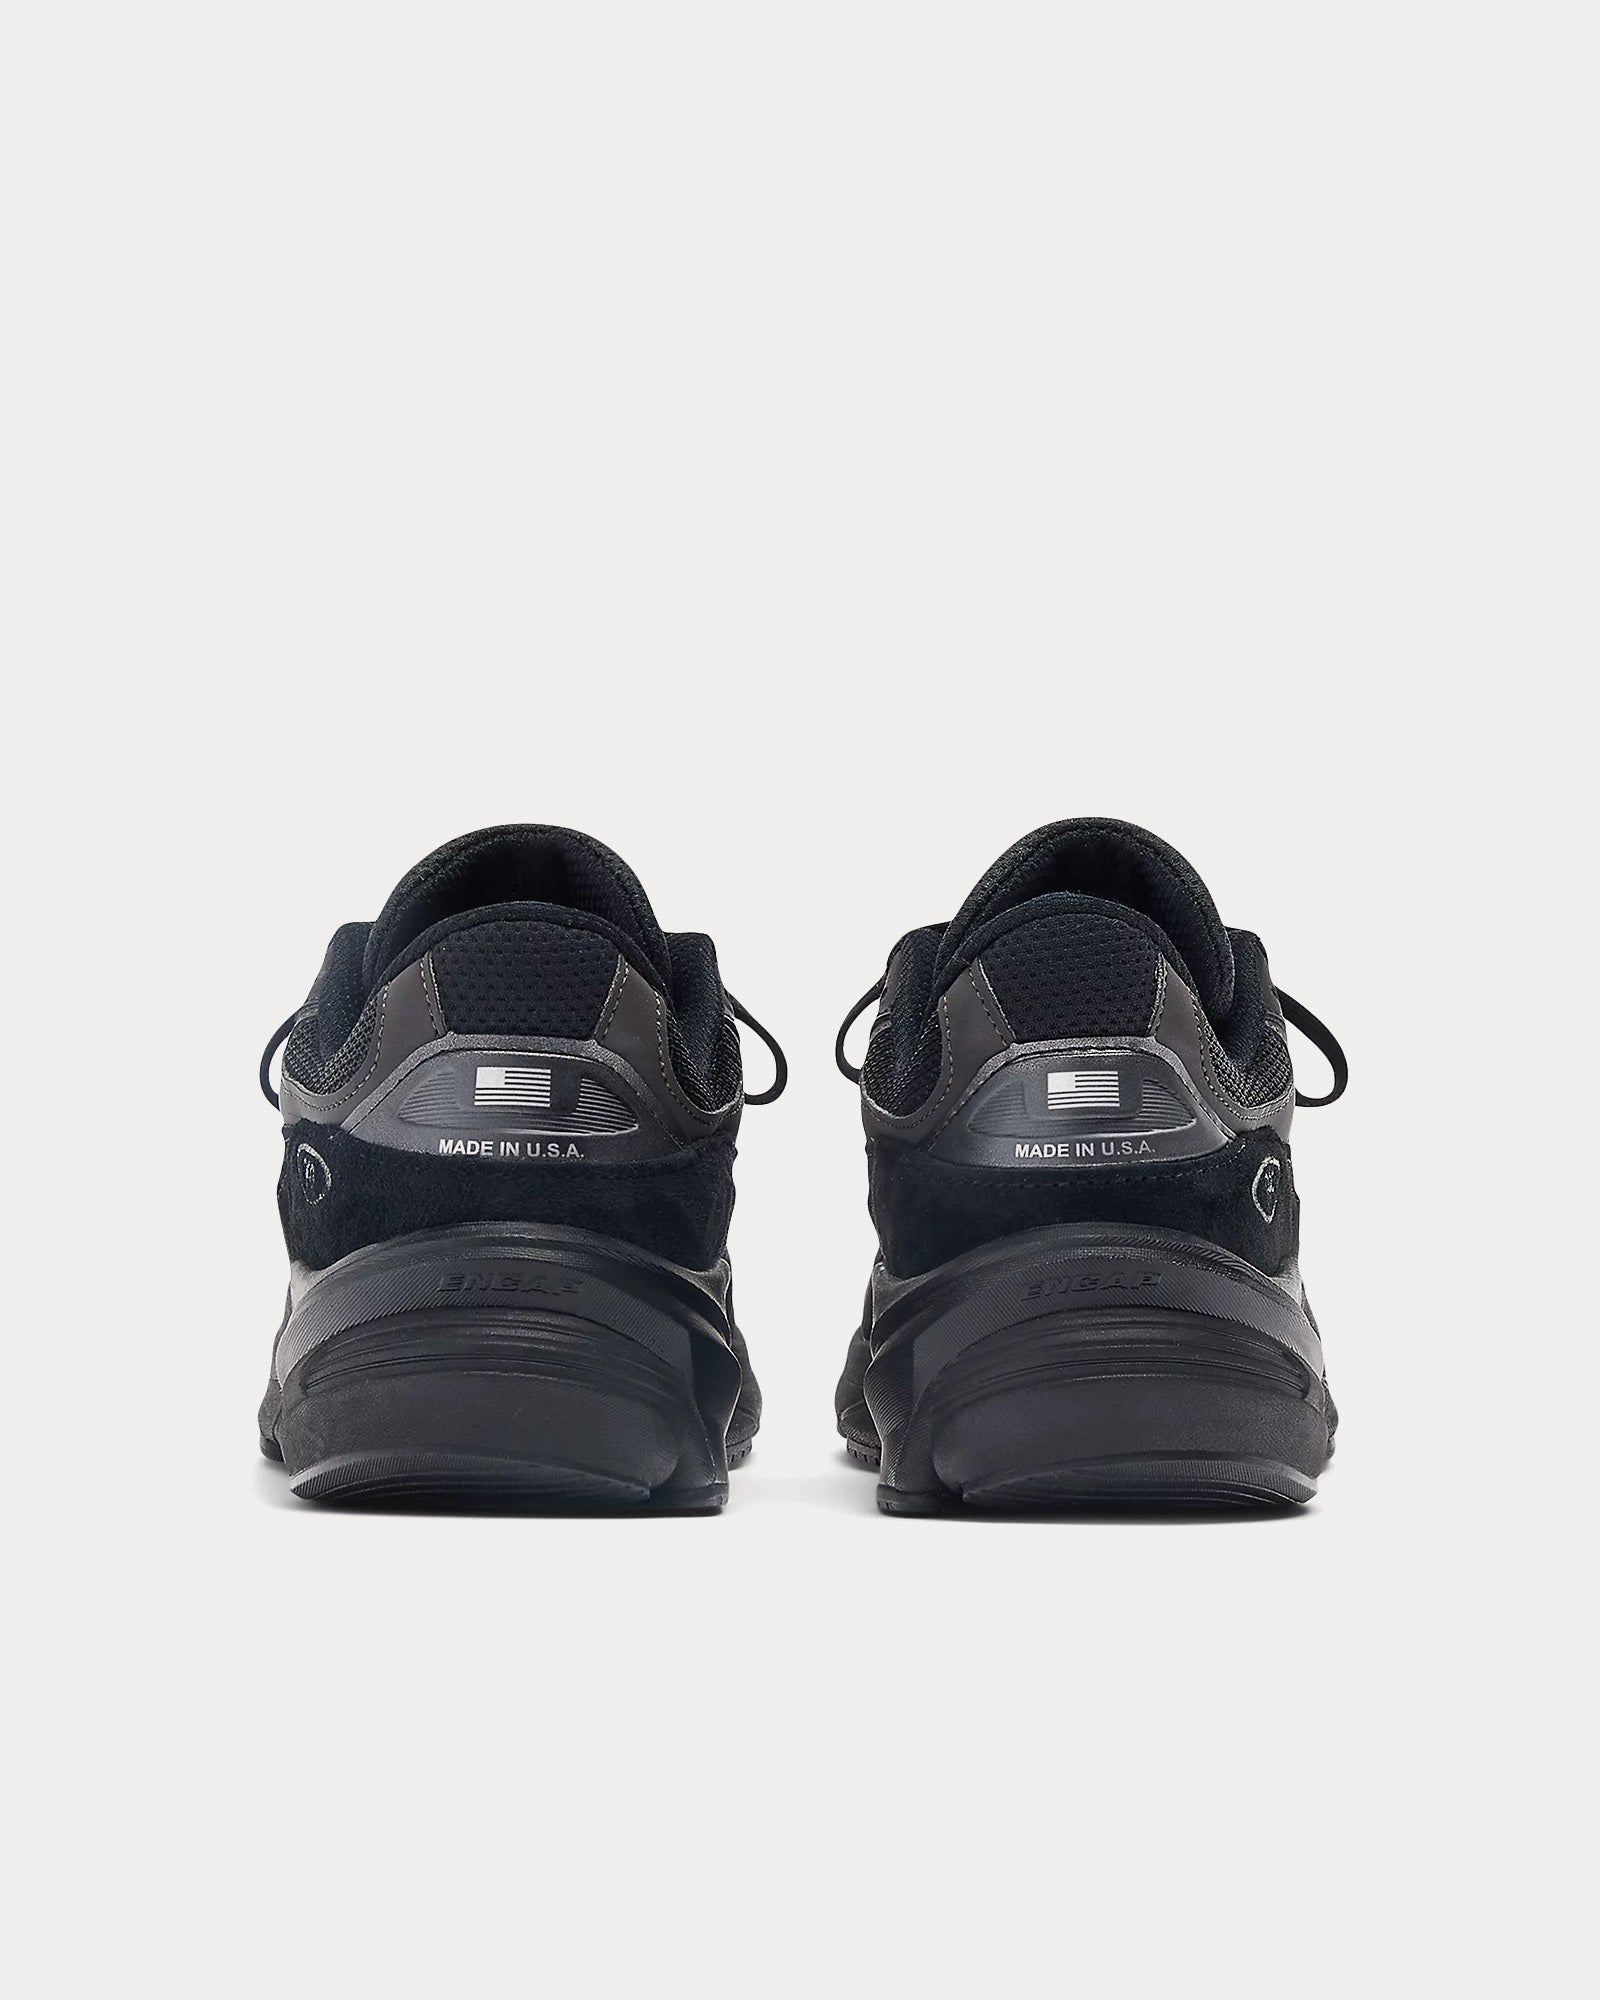 New Balance Made in USA 990v6 Triple Black Low Top Sneakers 